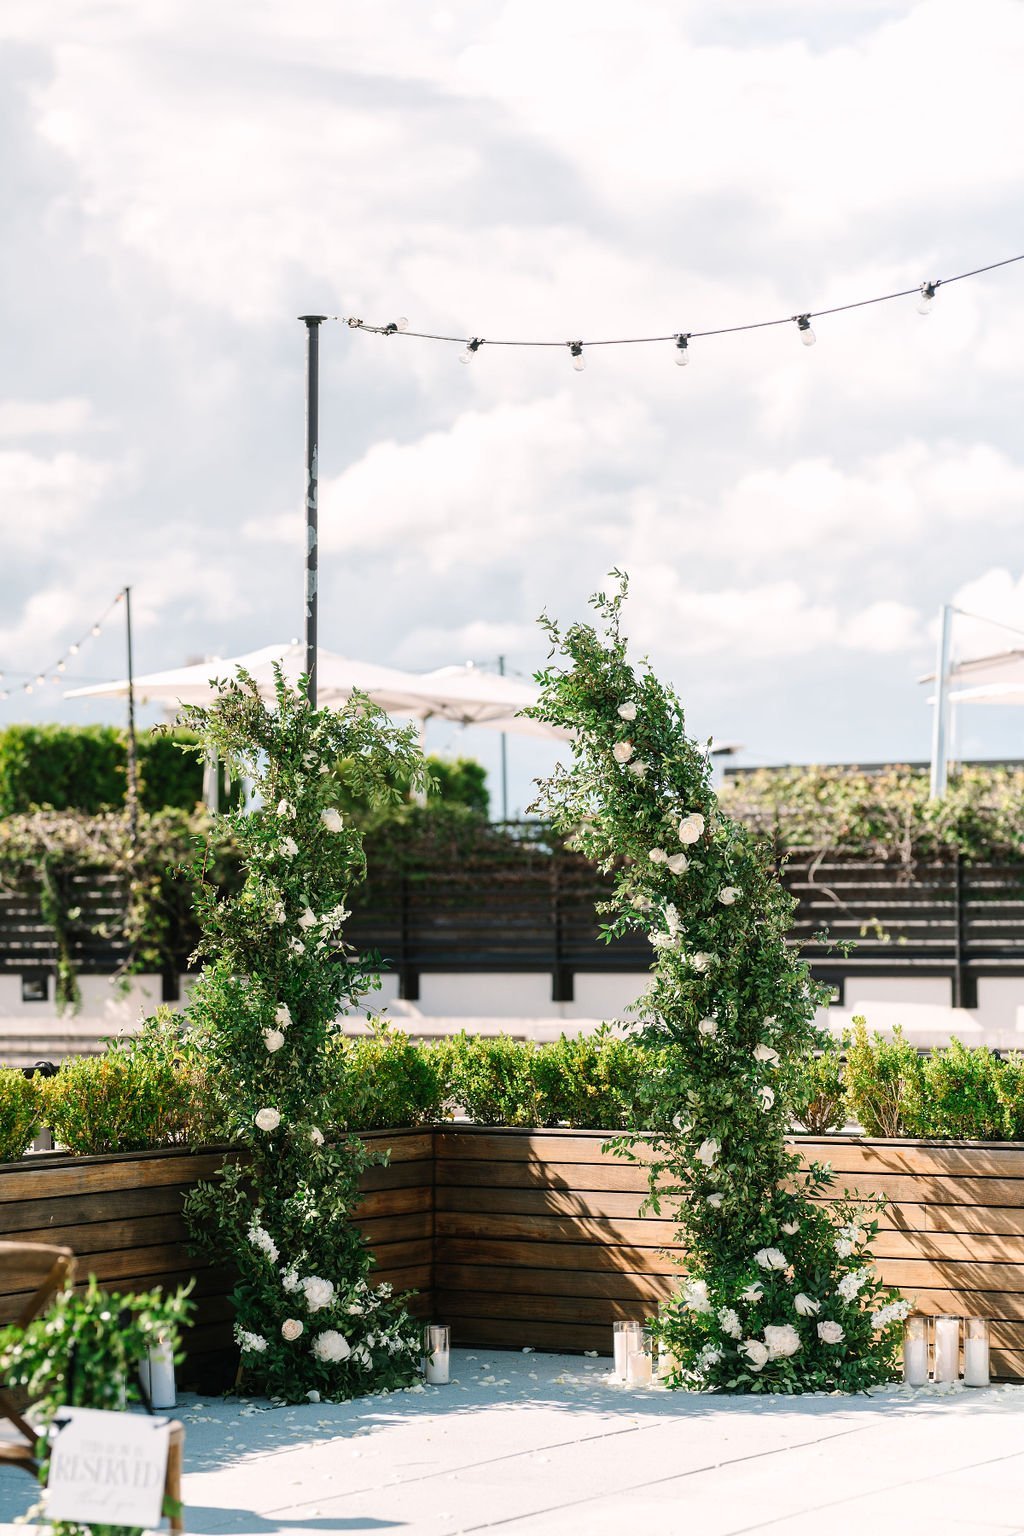 hayley-and-chris-romantic-rooftop-wedding-at-the-perry-lane-in-savannah-ga-featuring-organic-lush-wedding-florals-designed-by-ivory-and-beau-13.jpg